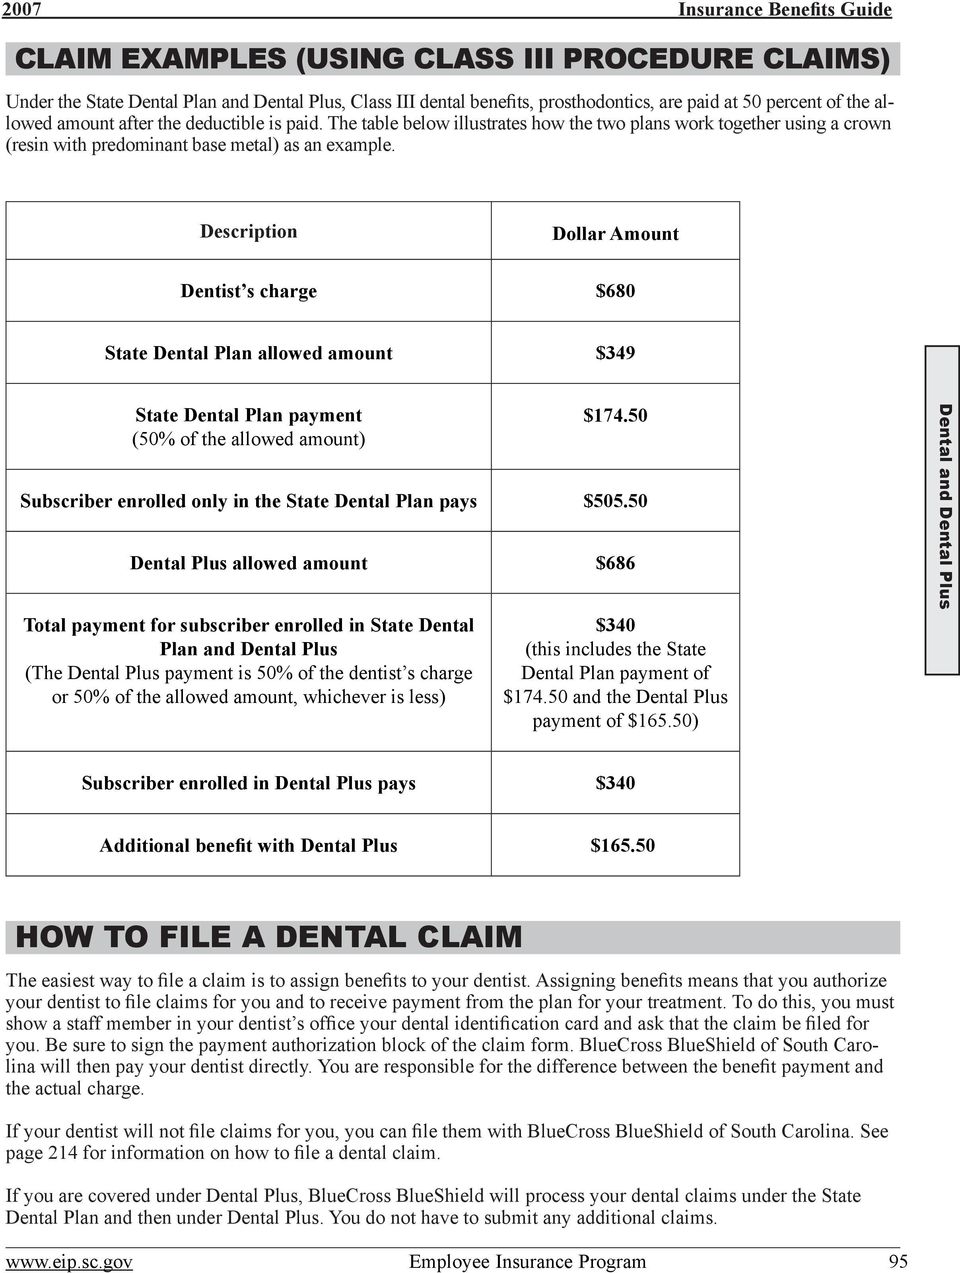 Description Dollar Amount Dentist s charge $680 State Dental allowed amount $349 State Dental payment (50% of the allowed amount) $174.50 Subscriber enrolled only in the State Dental pays $505.